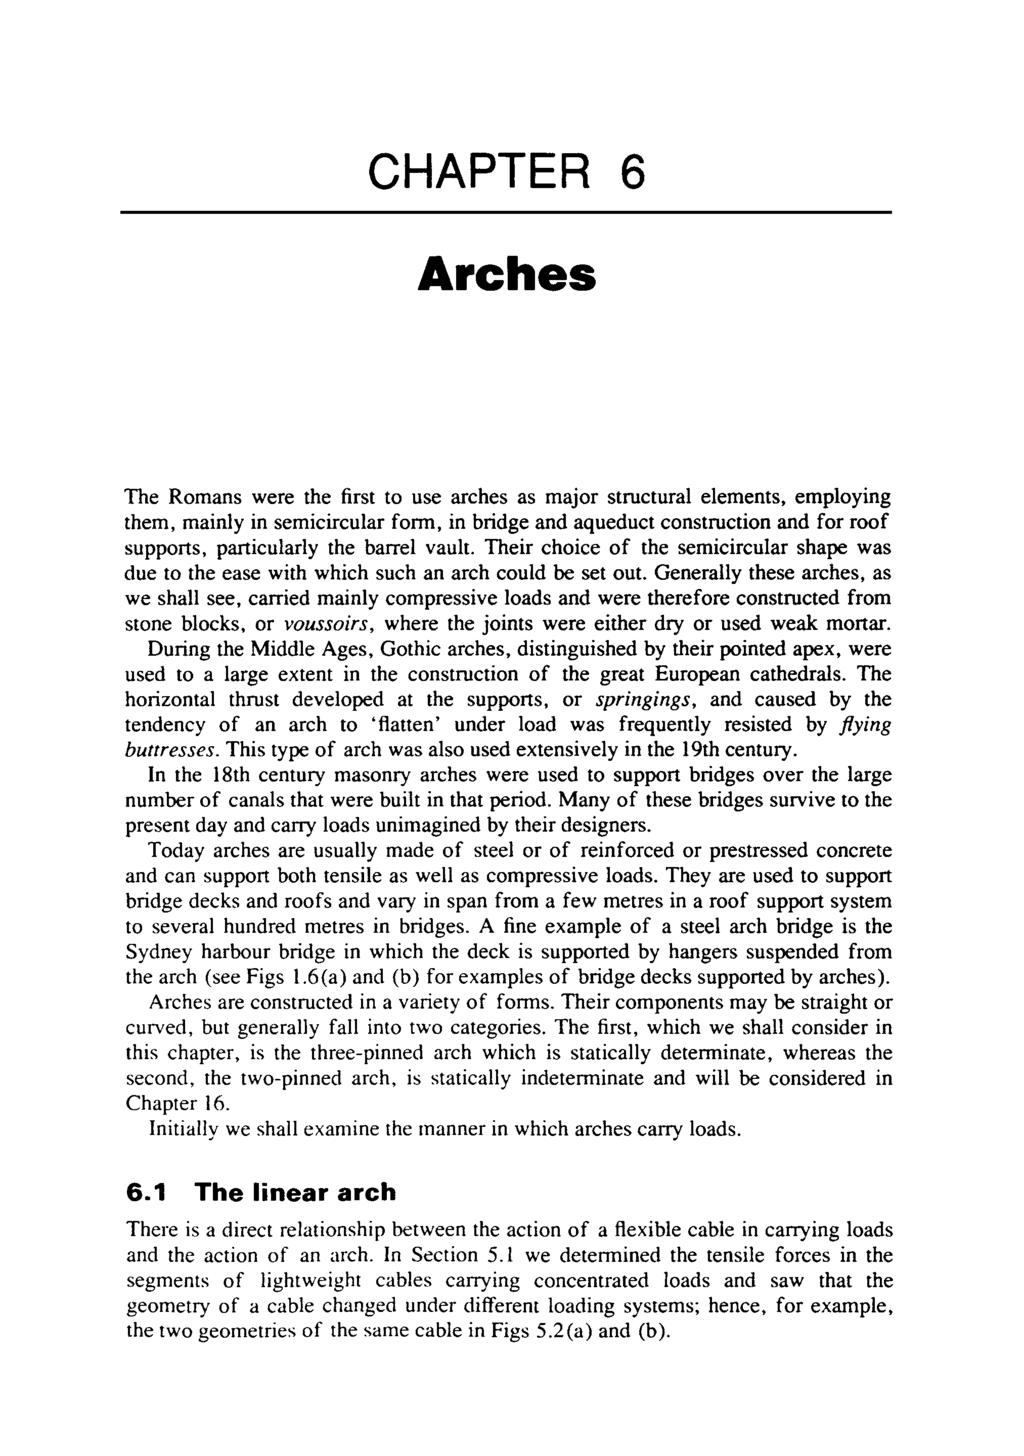 CHAPTER 6 The Romans were the first to use arches as major structural elements, employing them, mainly in semicircular form, in bridge and aqueduct construction and for roof supports, particularly